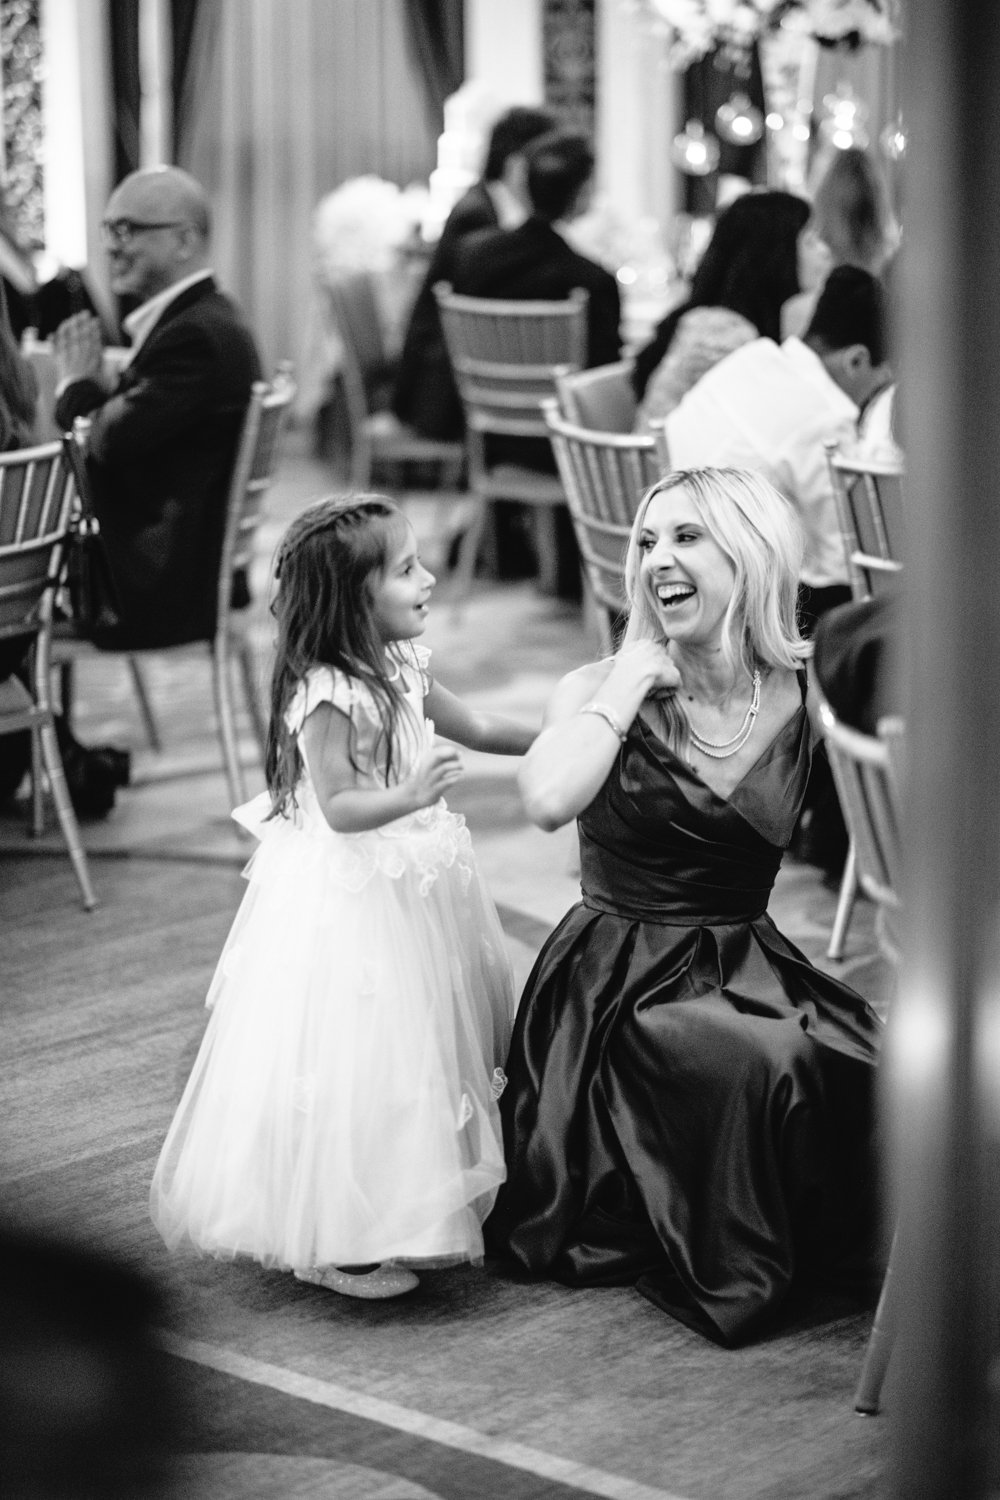 A woman is crouched down on the floor net to a young girl. They are smiling at each other.

Manhattan Luxury Wedding. New York Luxury Wedding Photographer. Wedding in Manhattan. NYC Luxury Wedding.